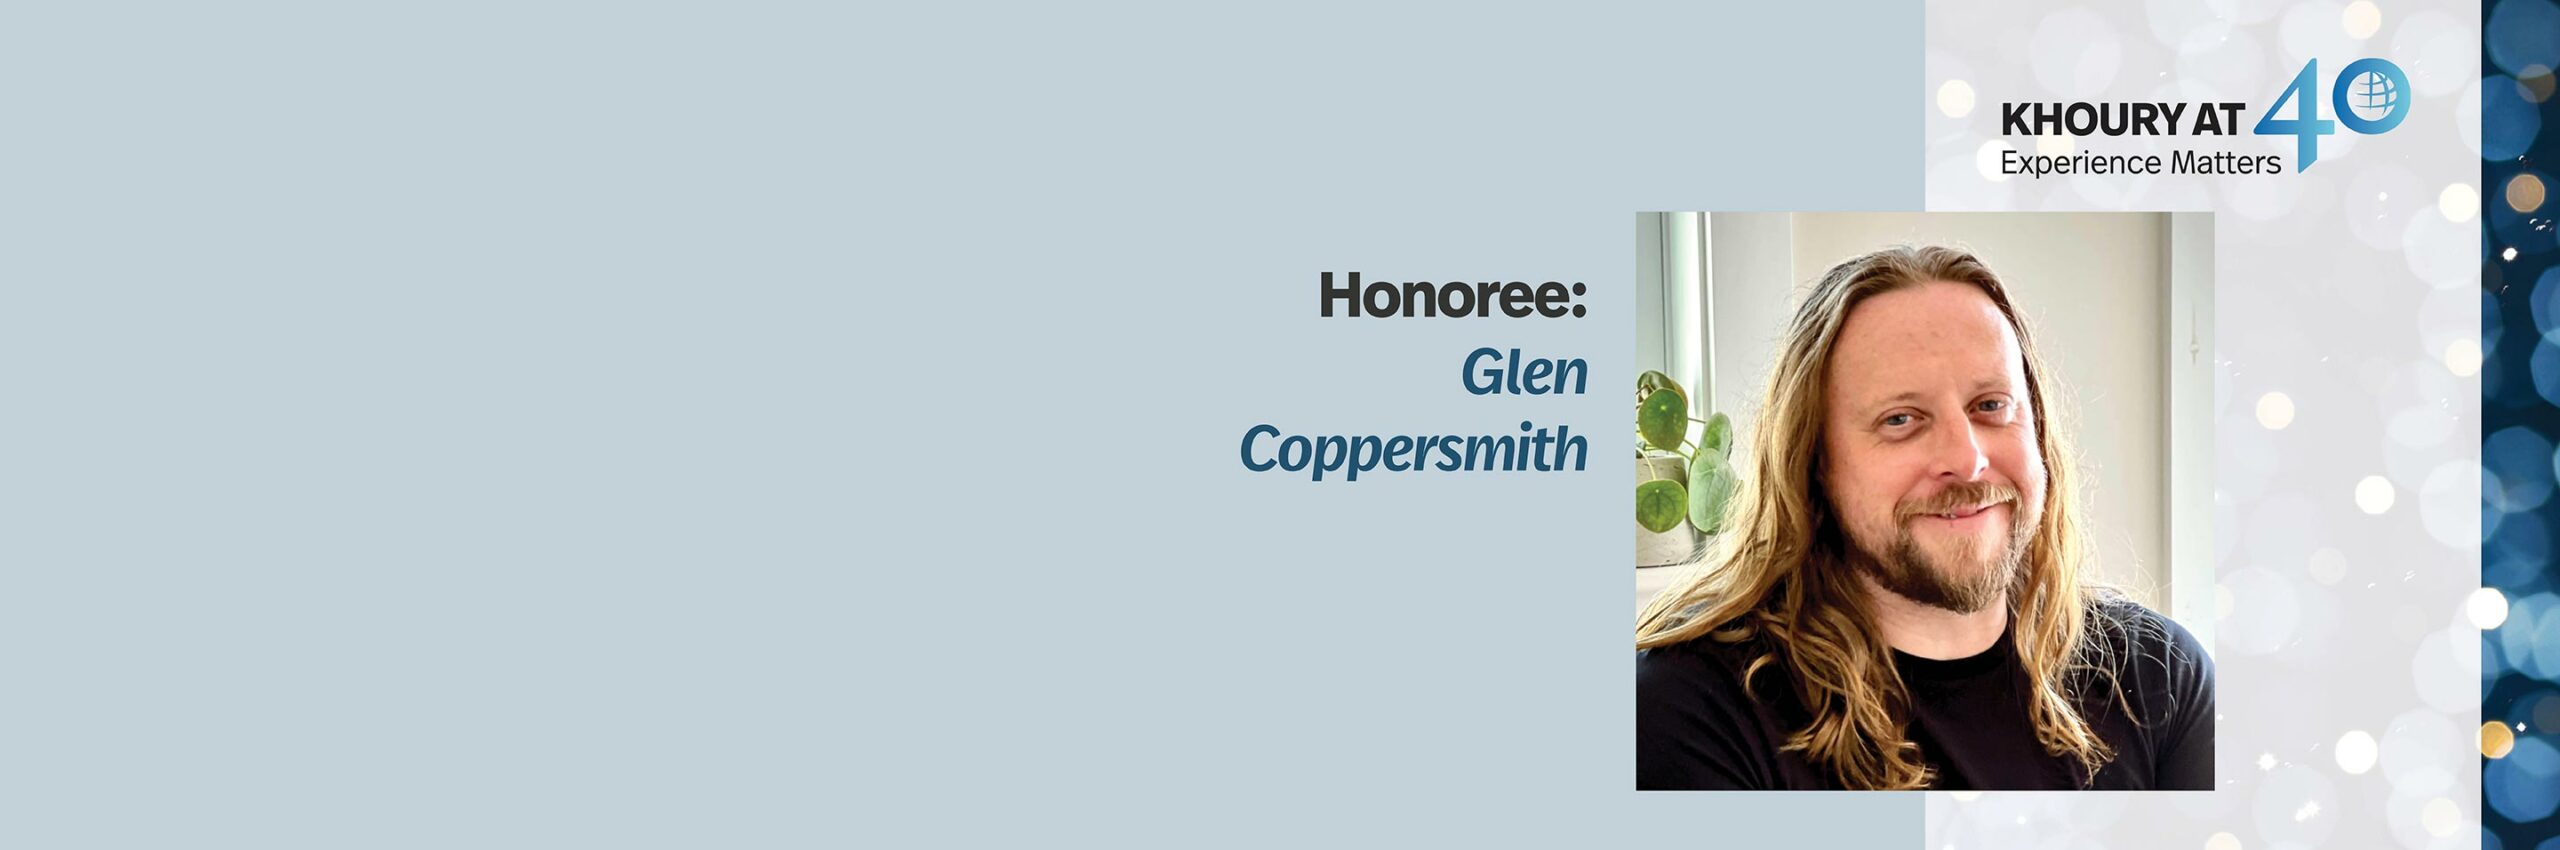 40 for 40 Honoree: Glen Coppersmith